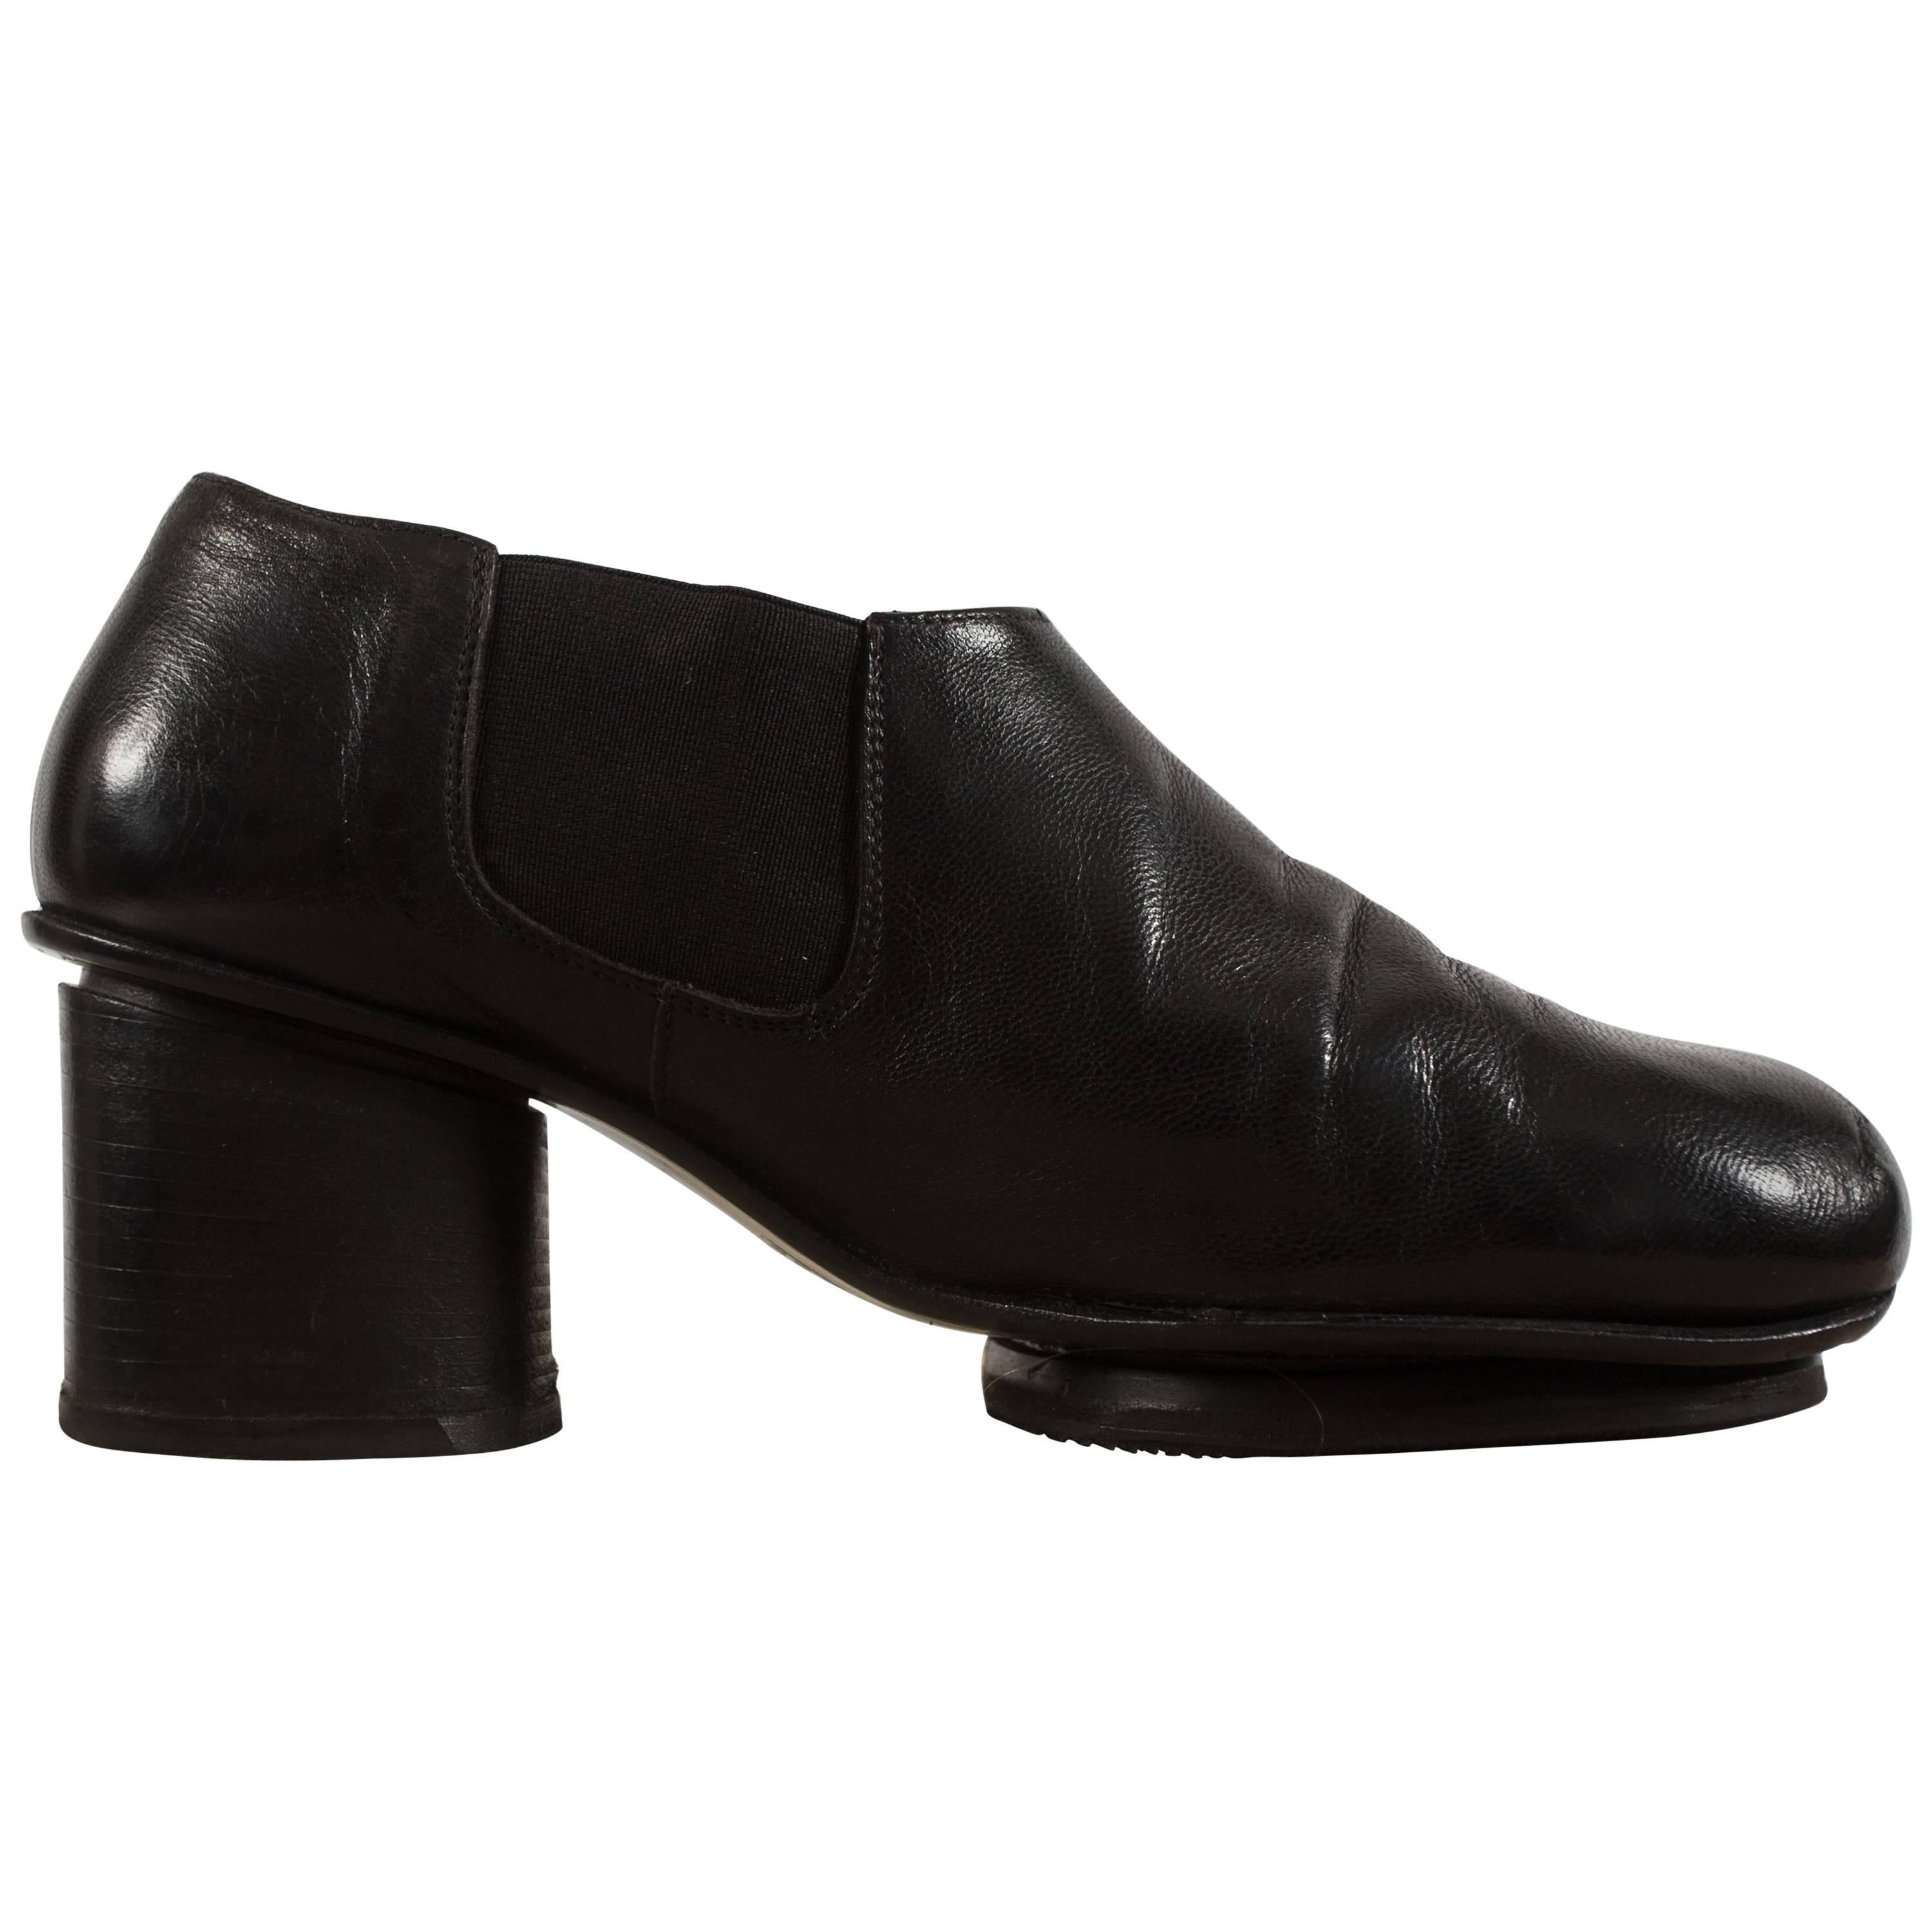 Martin Margiela black leather heeled pumps with sock boots, fw 1999 For Sale